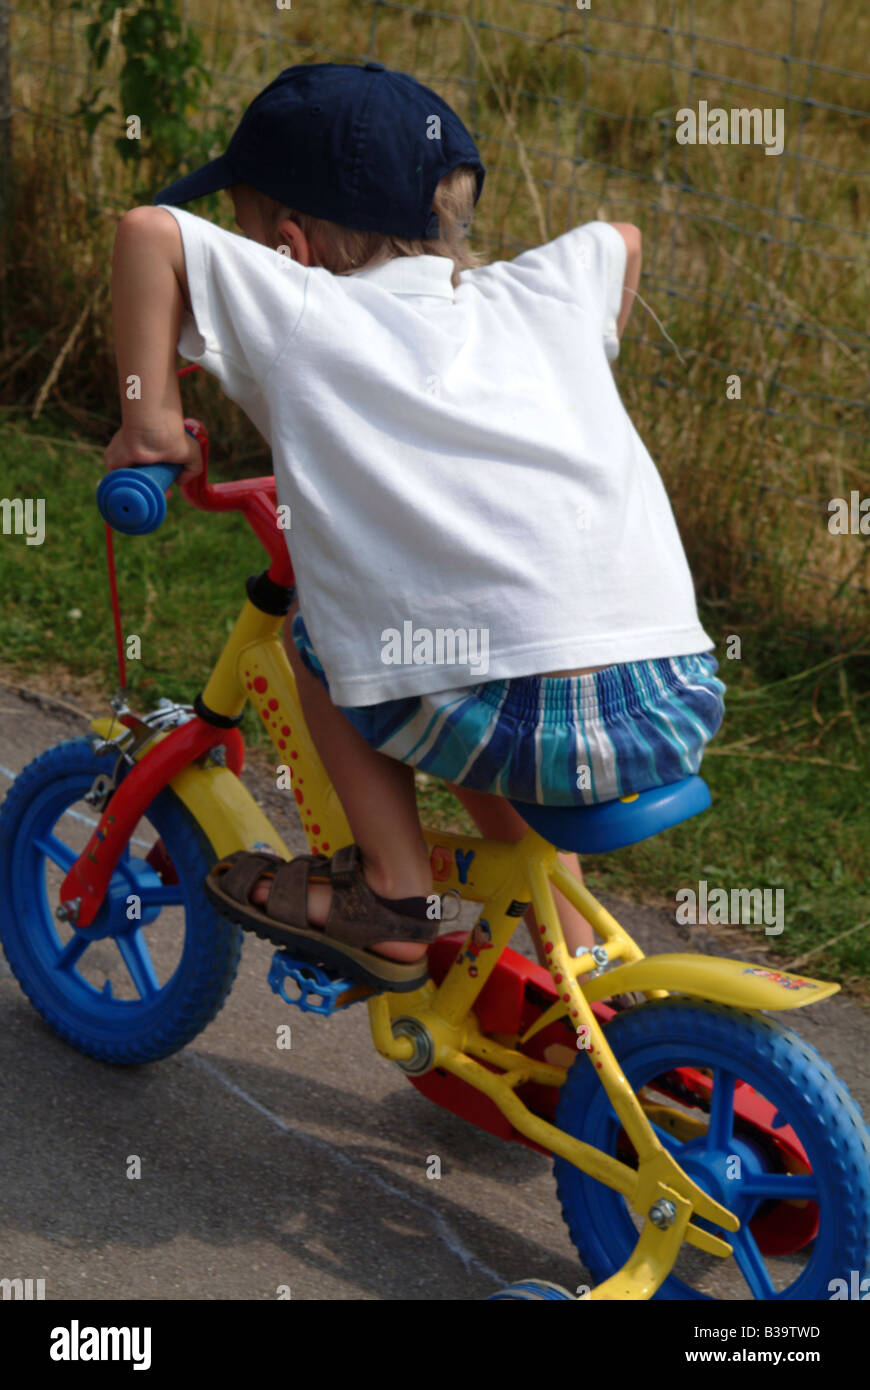 Rear view of a little boy on bike with stabilizers Stock Photo